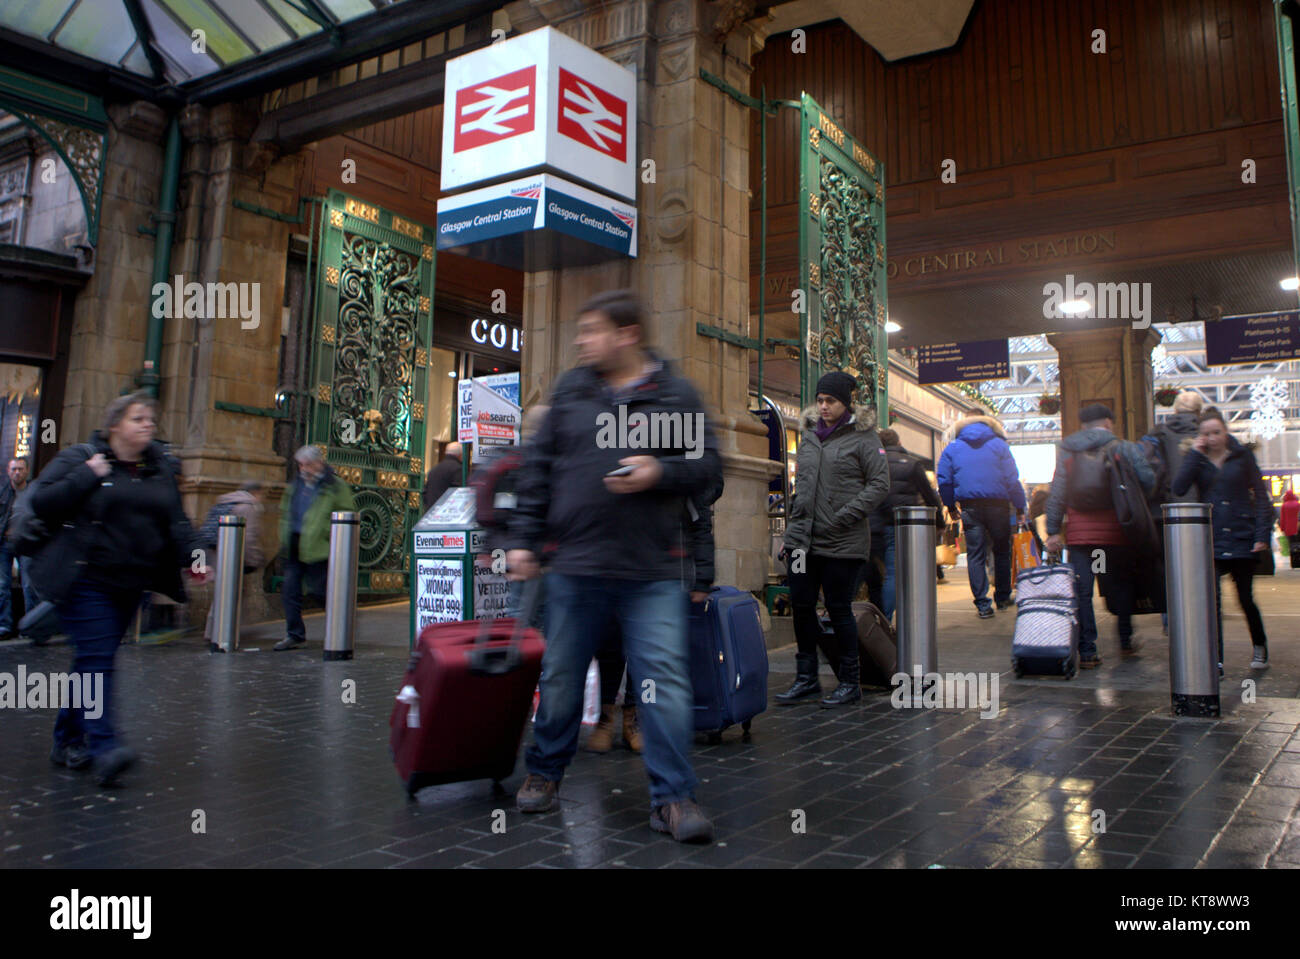 Glasgow, Scotland, 22nd December. Early start to the 'Frantic Friday' getaway saw Glasgow central railway station buzzing from early morning credit Gerard Ferry/Alamy news Stock Photo